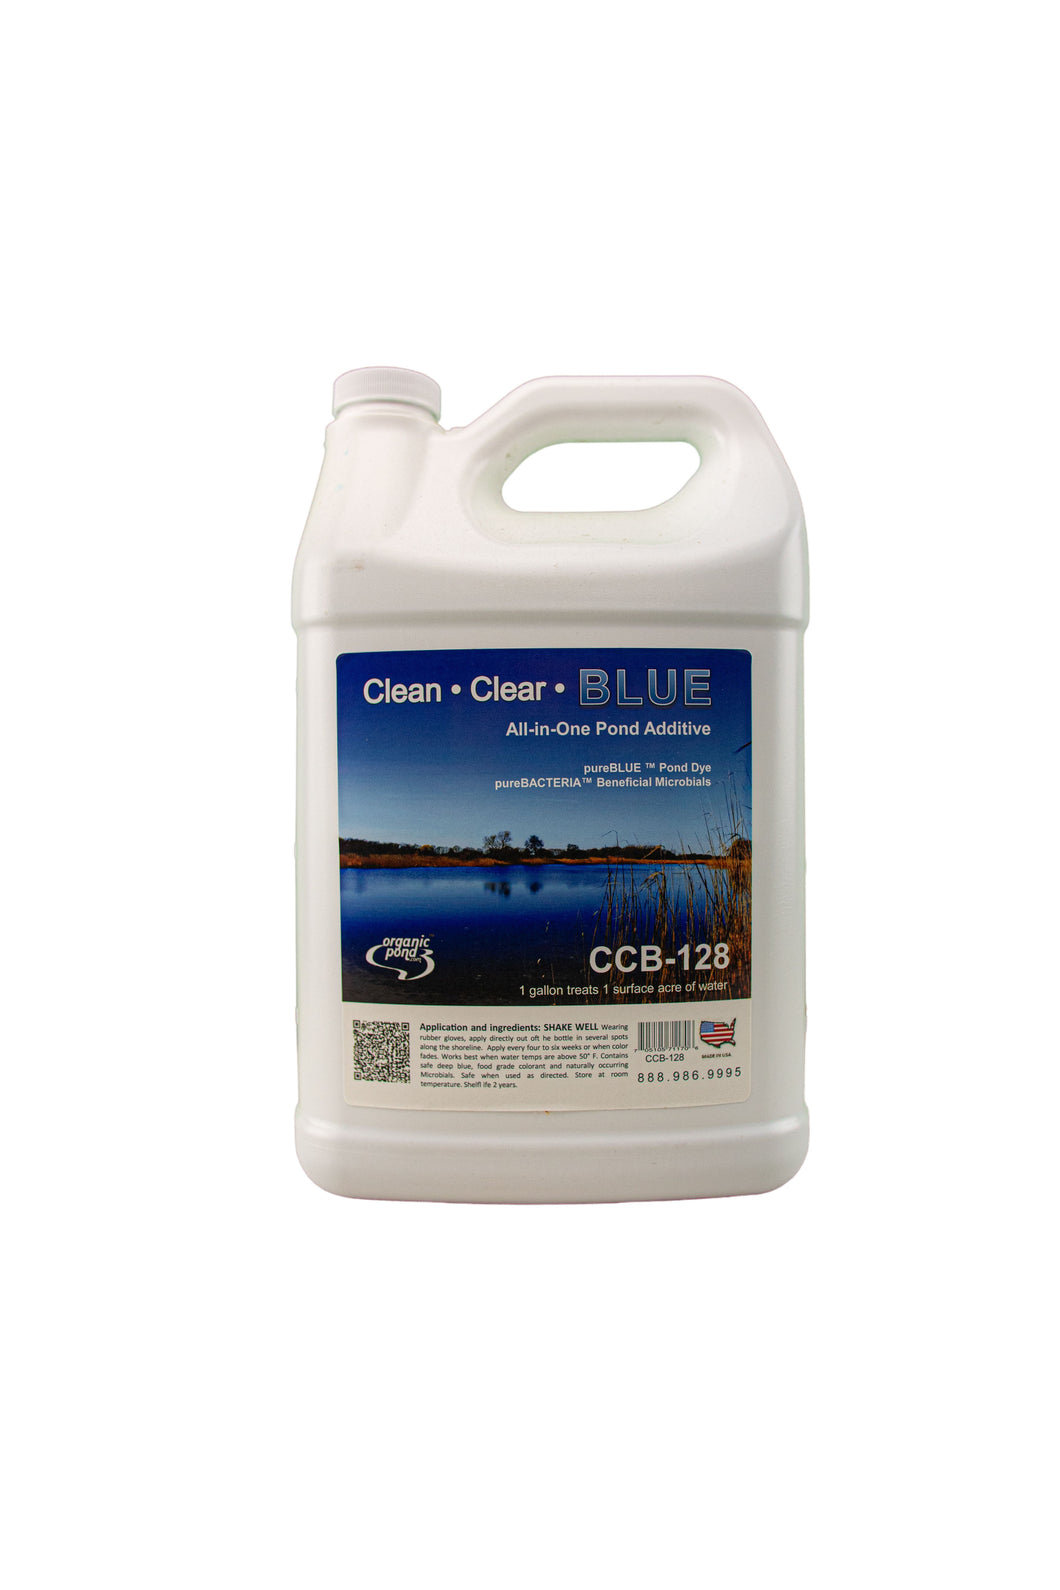 Organic Pond™ Clean Clear Blue™ Complete Pond Treatment